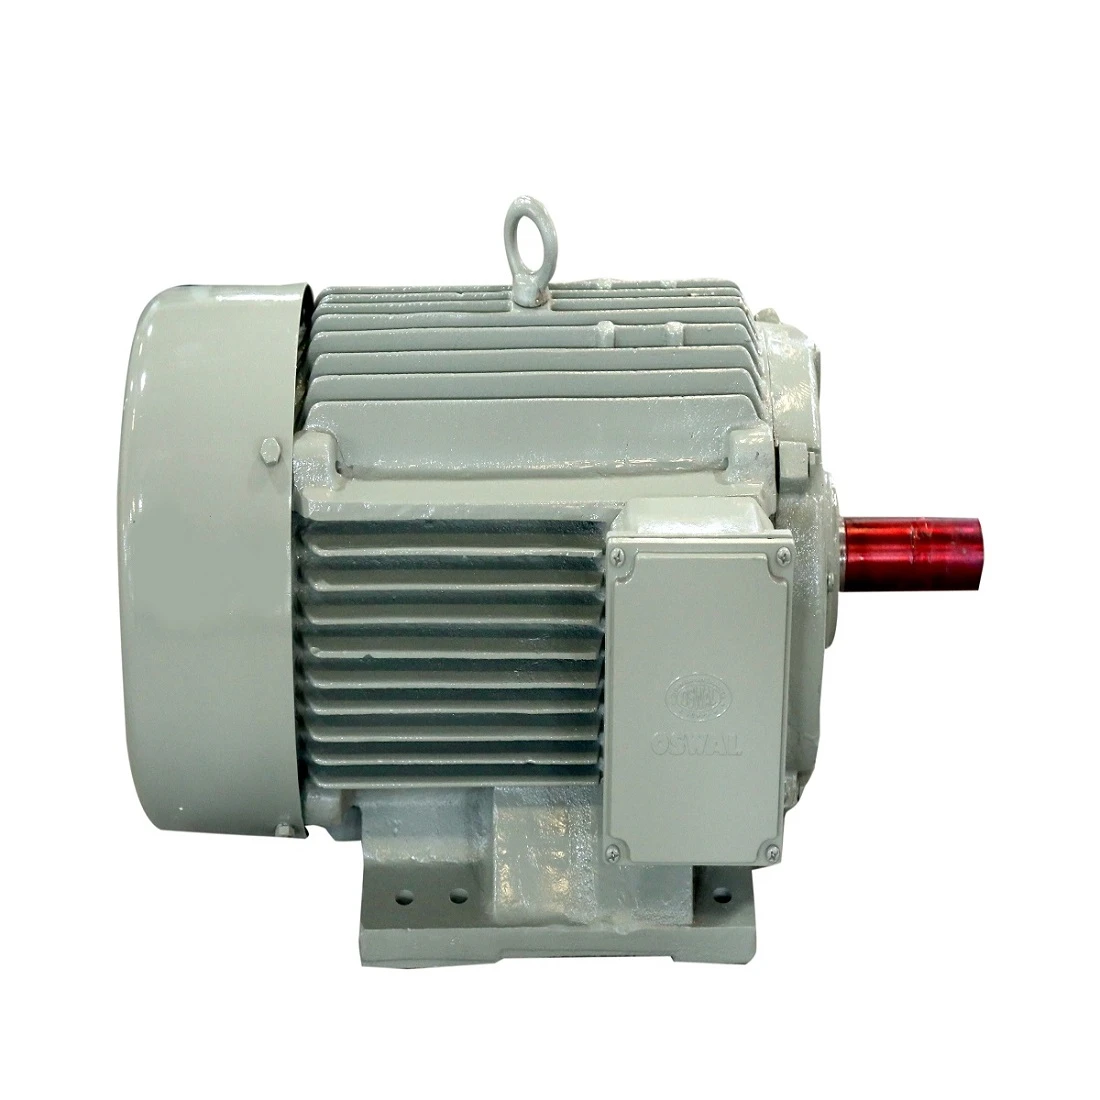 960RPM TRIPLE PHASE INDUCTION MOTOR